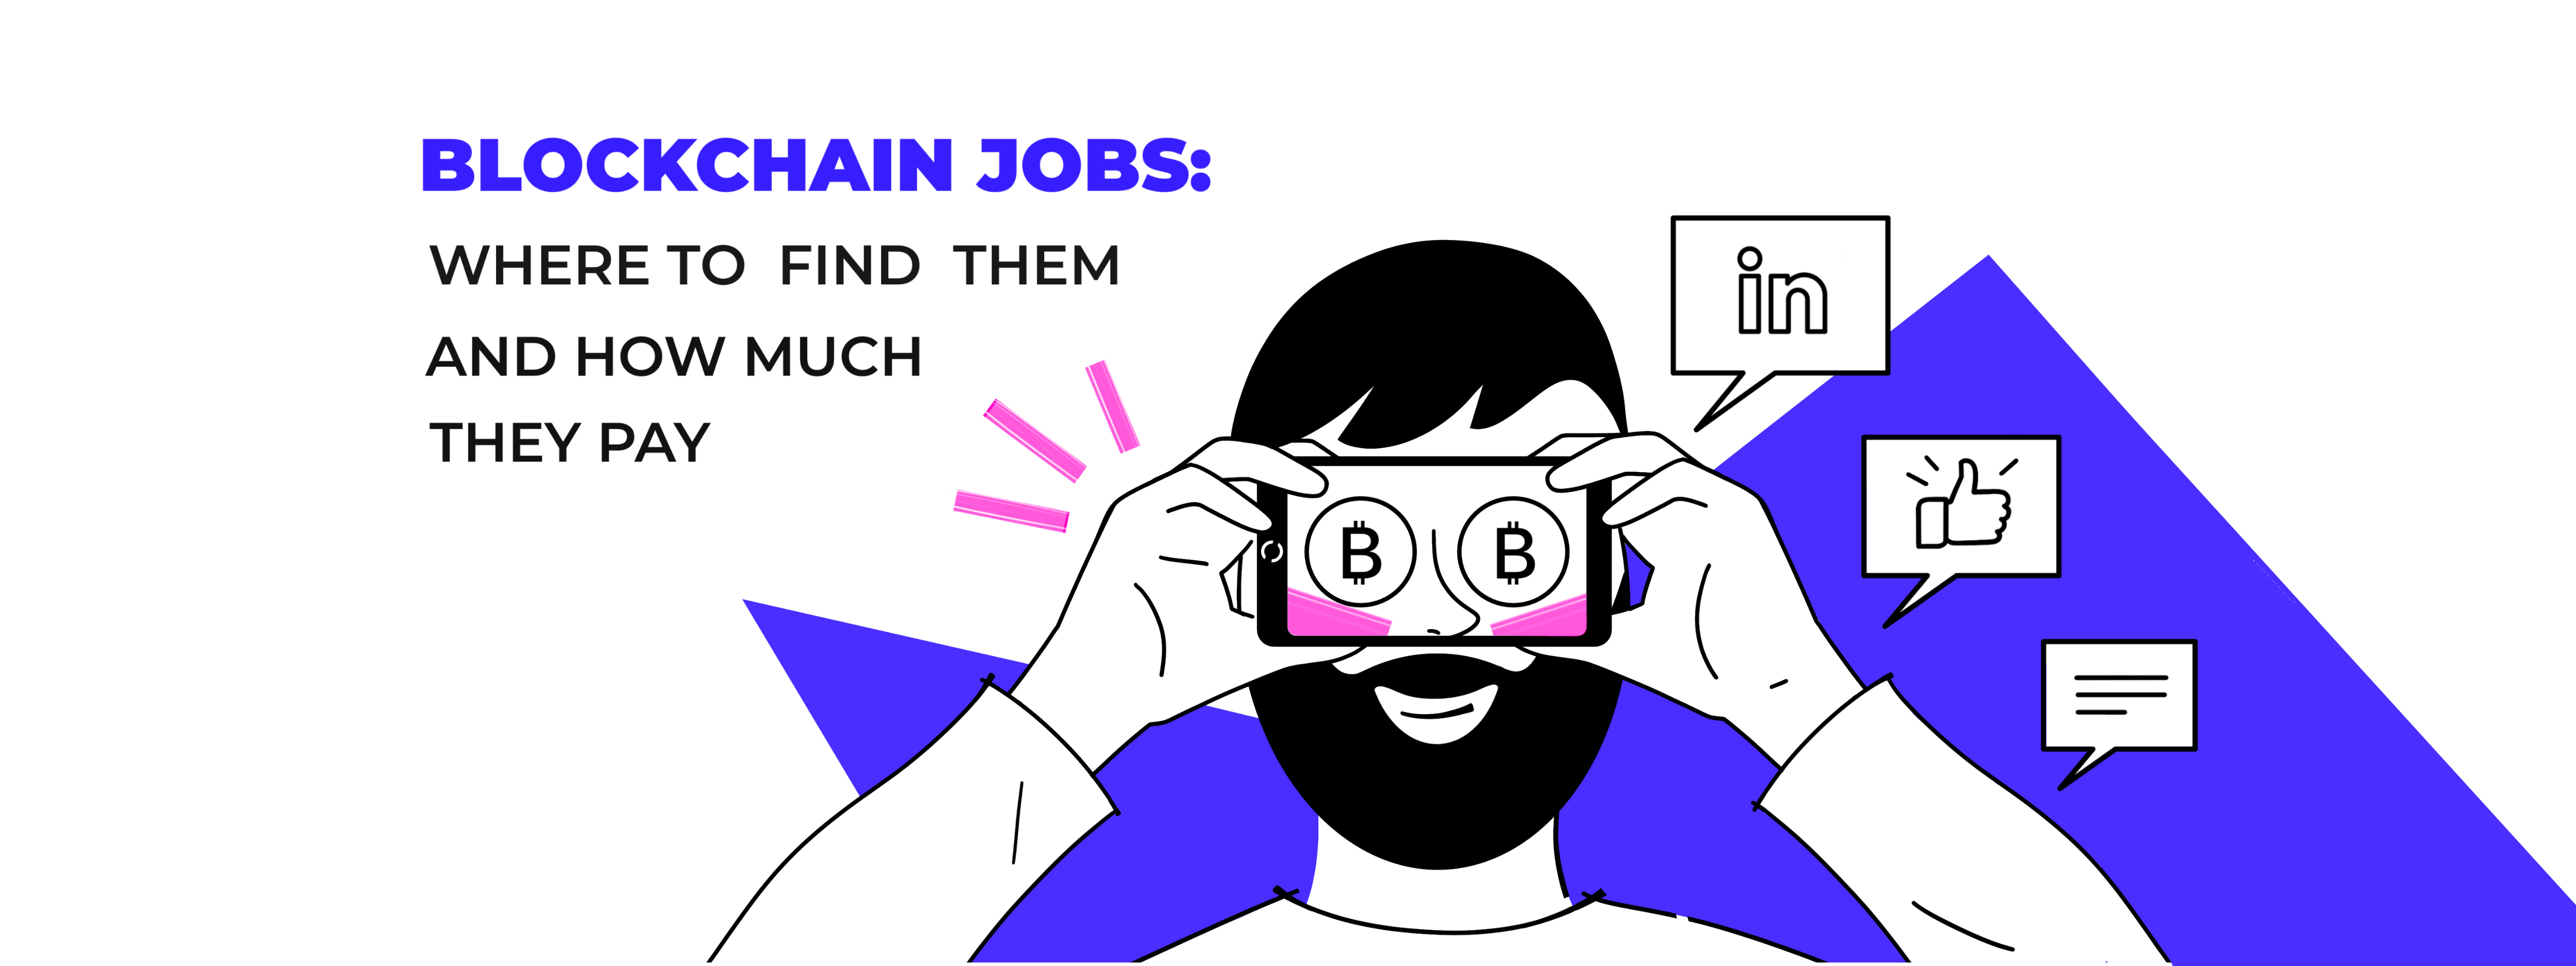 Blockchain jobs: where to find them and how much they pay